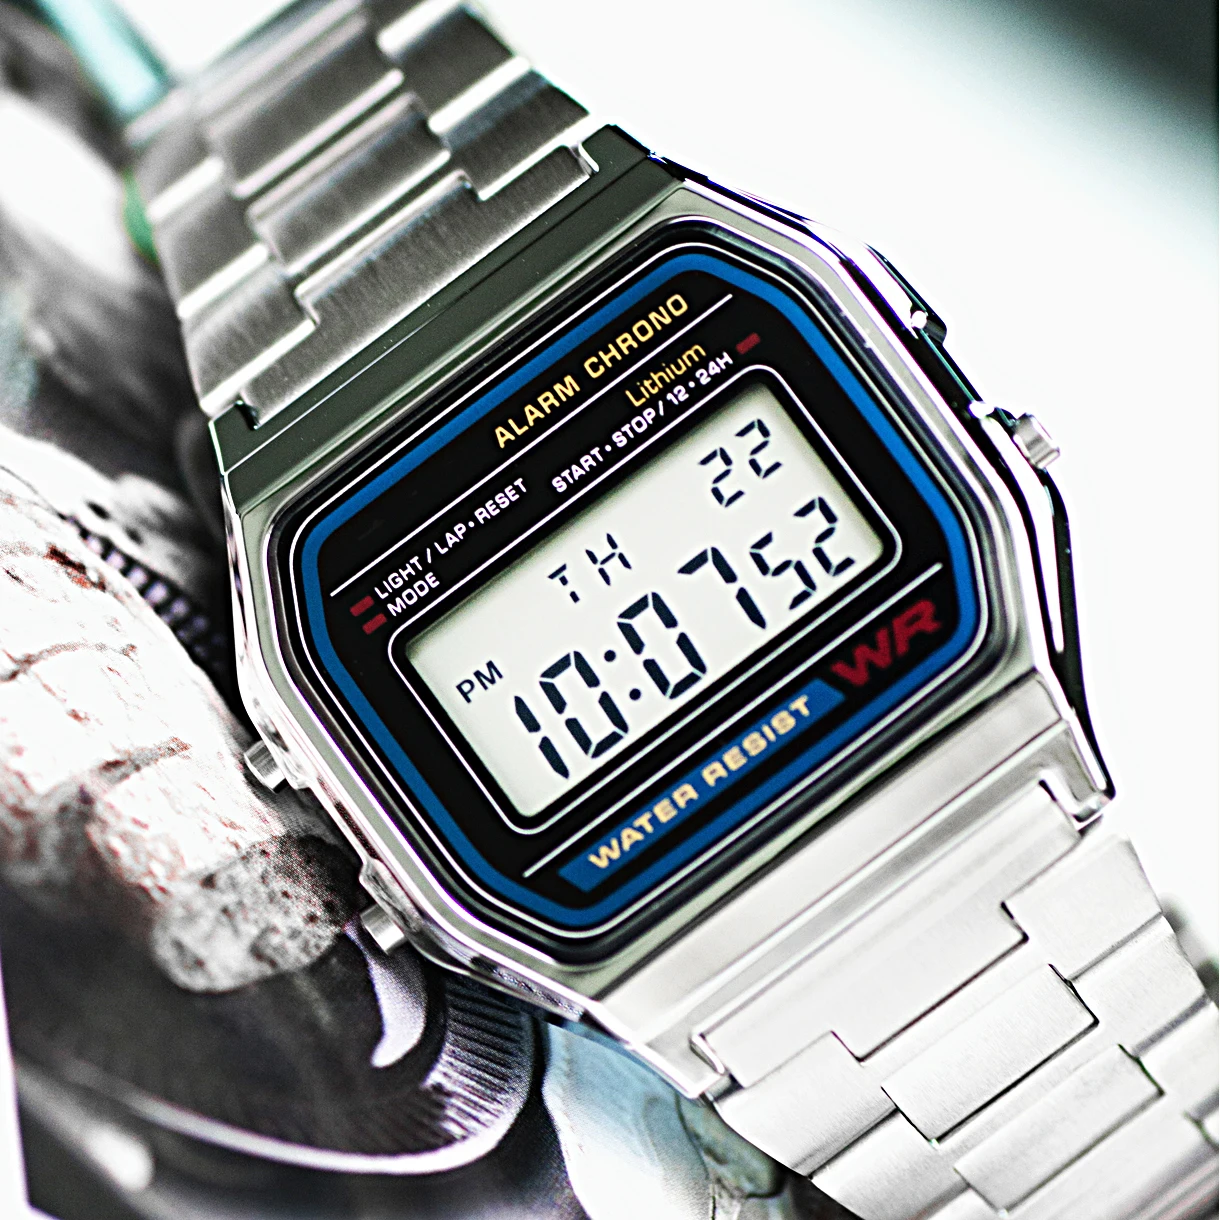 Luxury F91W Steel Band Watch Retro LED Digital Sports Military Watch Electronic Wrist Band Clock Ladies Men Couples enlarge